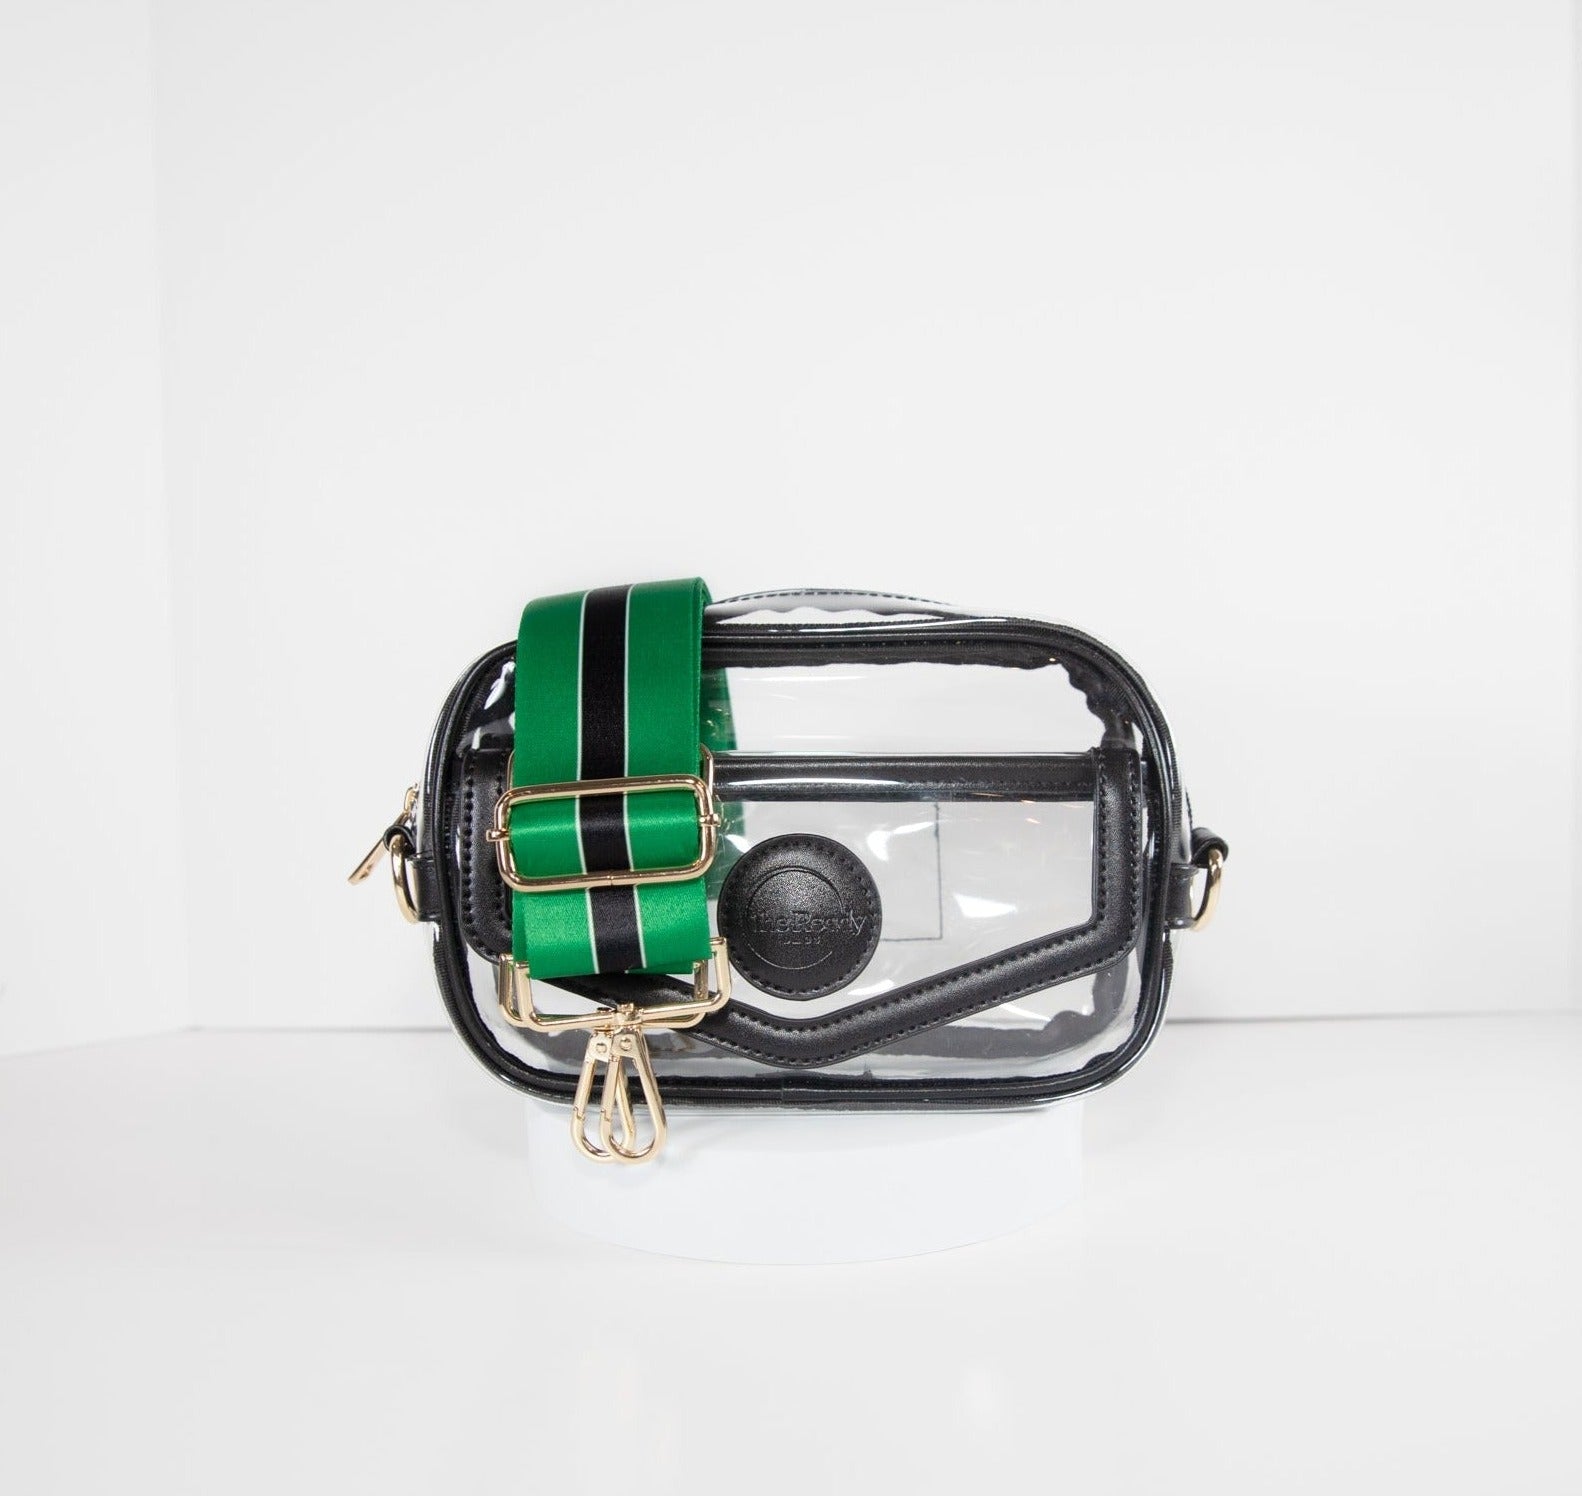 Clear stadium bag with black leather trim, front facing, with a crossbody strap in Philadelphia Eagles colors.